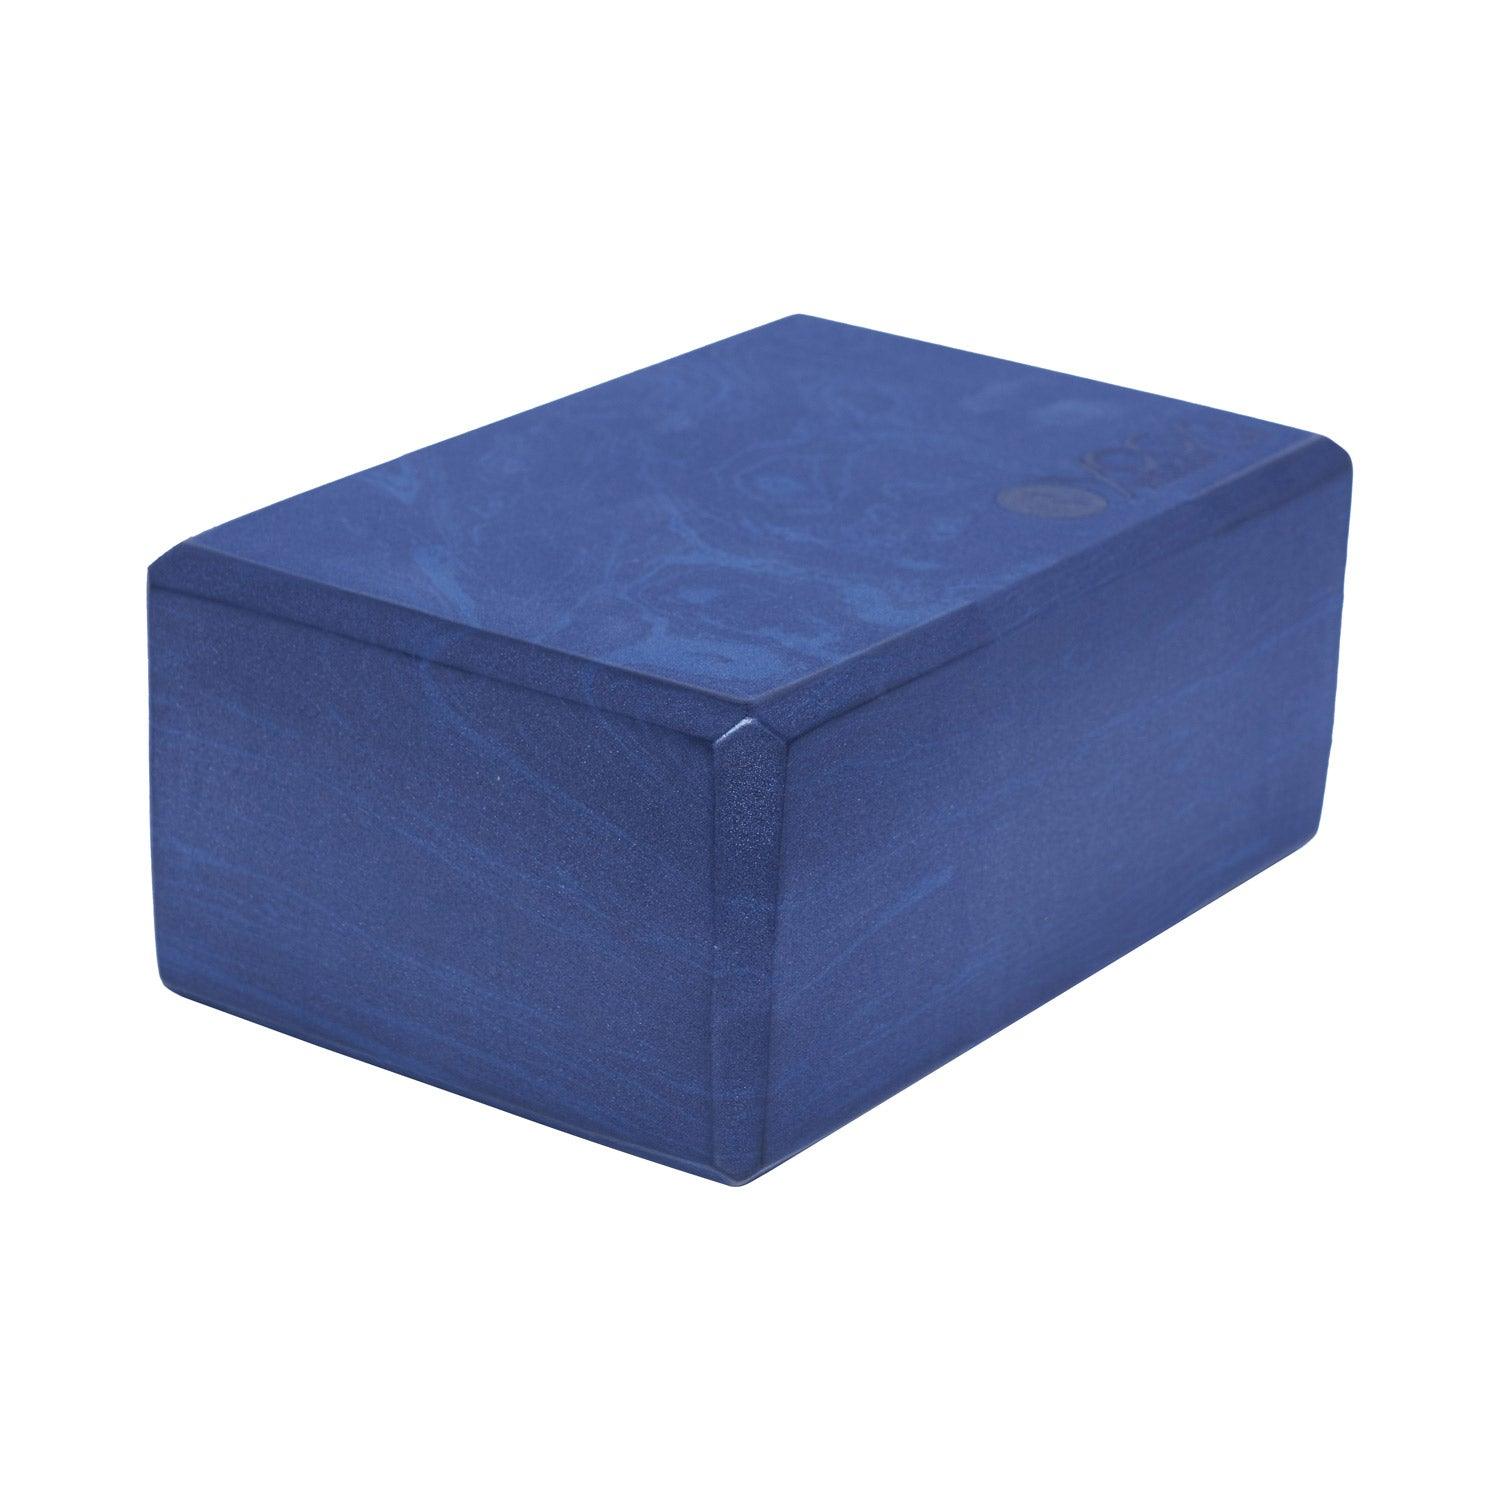 Cork Yoga Block - Navy - To elevate your experience and improve your alignment - Yoga Design Lab 